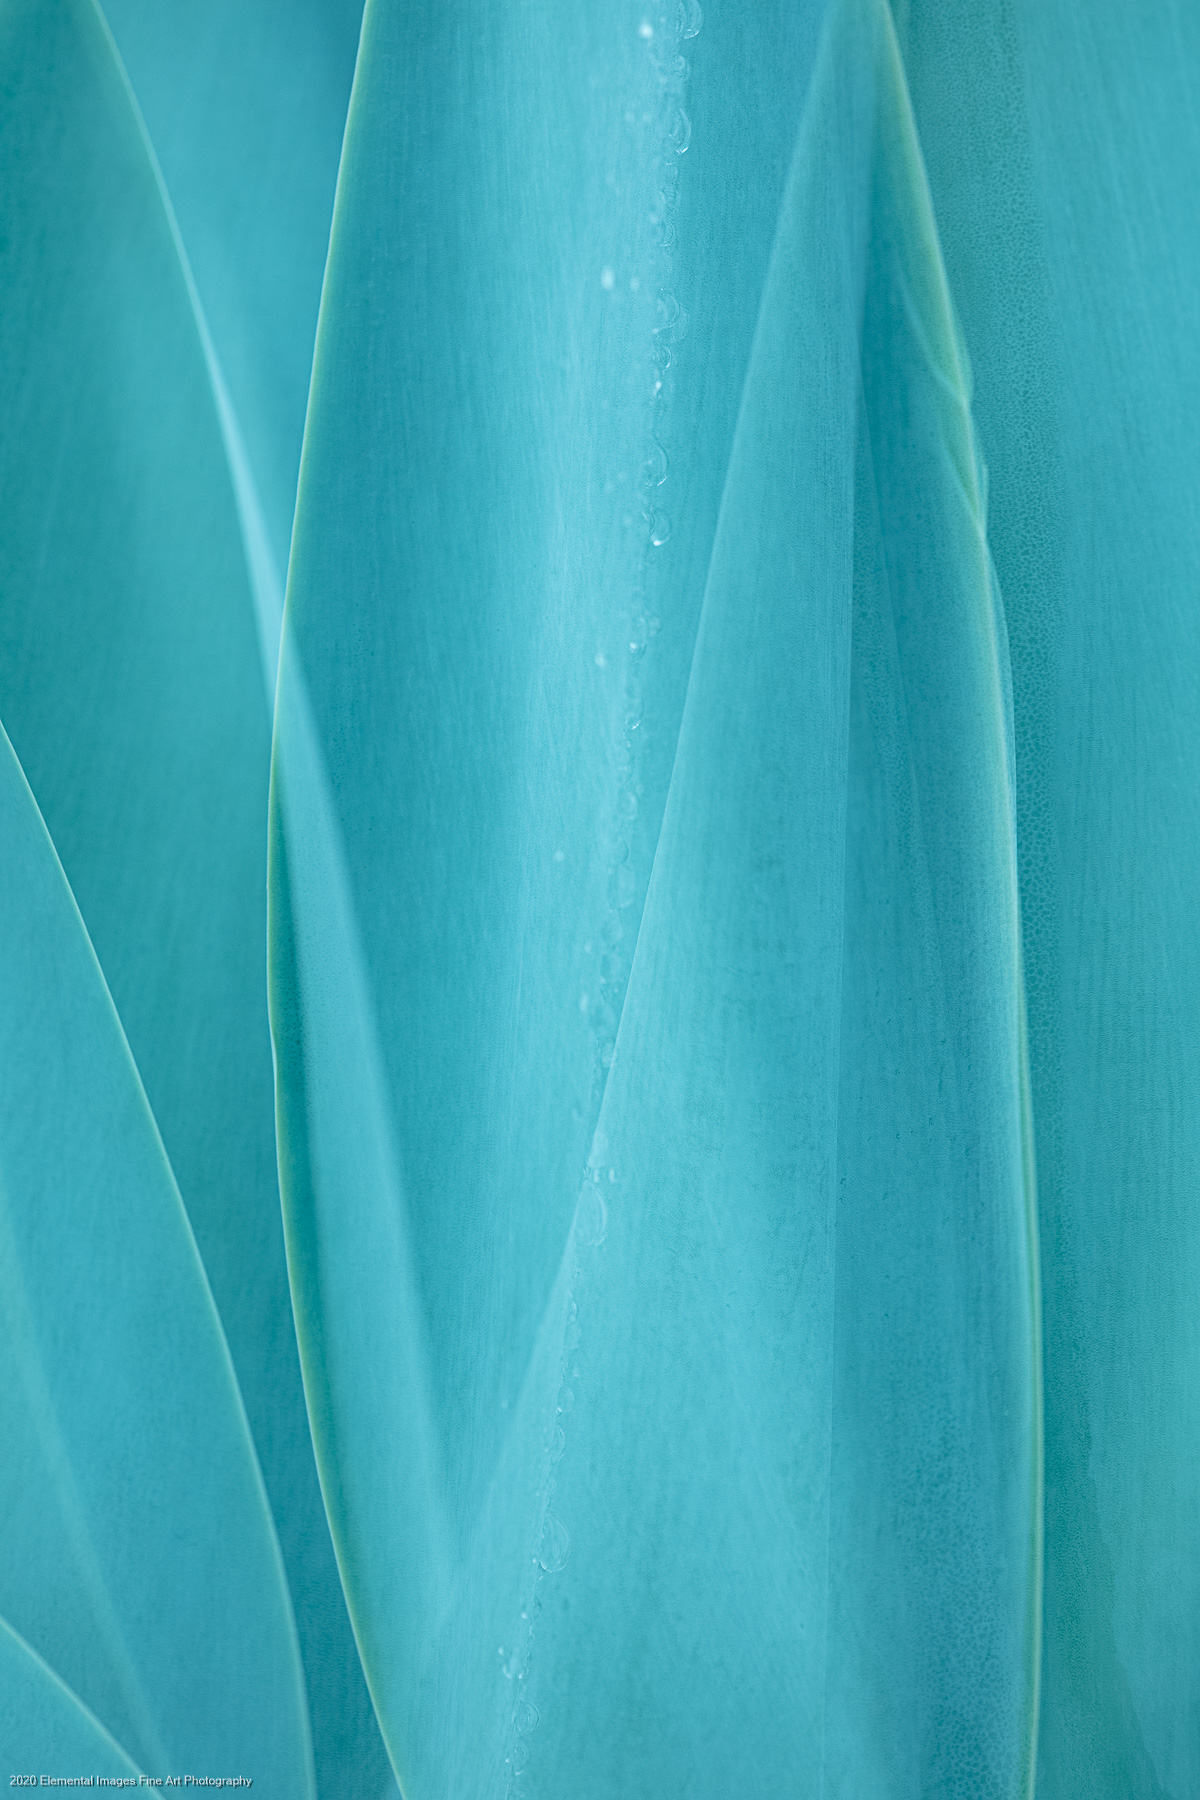 Agaves #39 | San Marino | CA |  - © 2020 Elemental Images Fine Art Photography - All Rights Reserved Worldwide